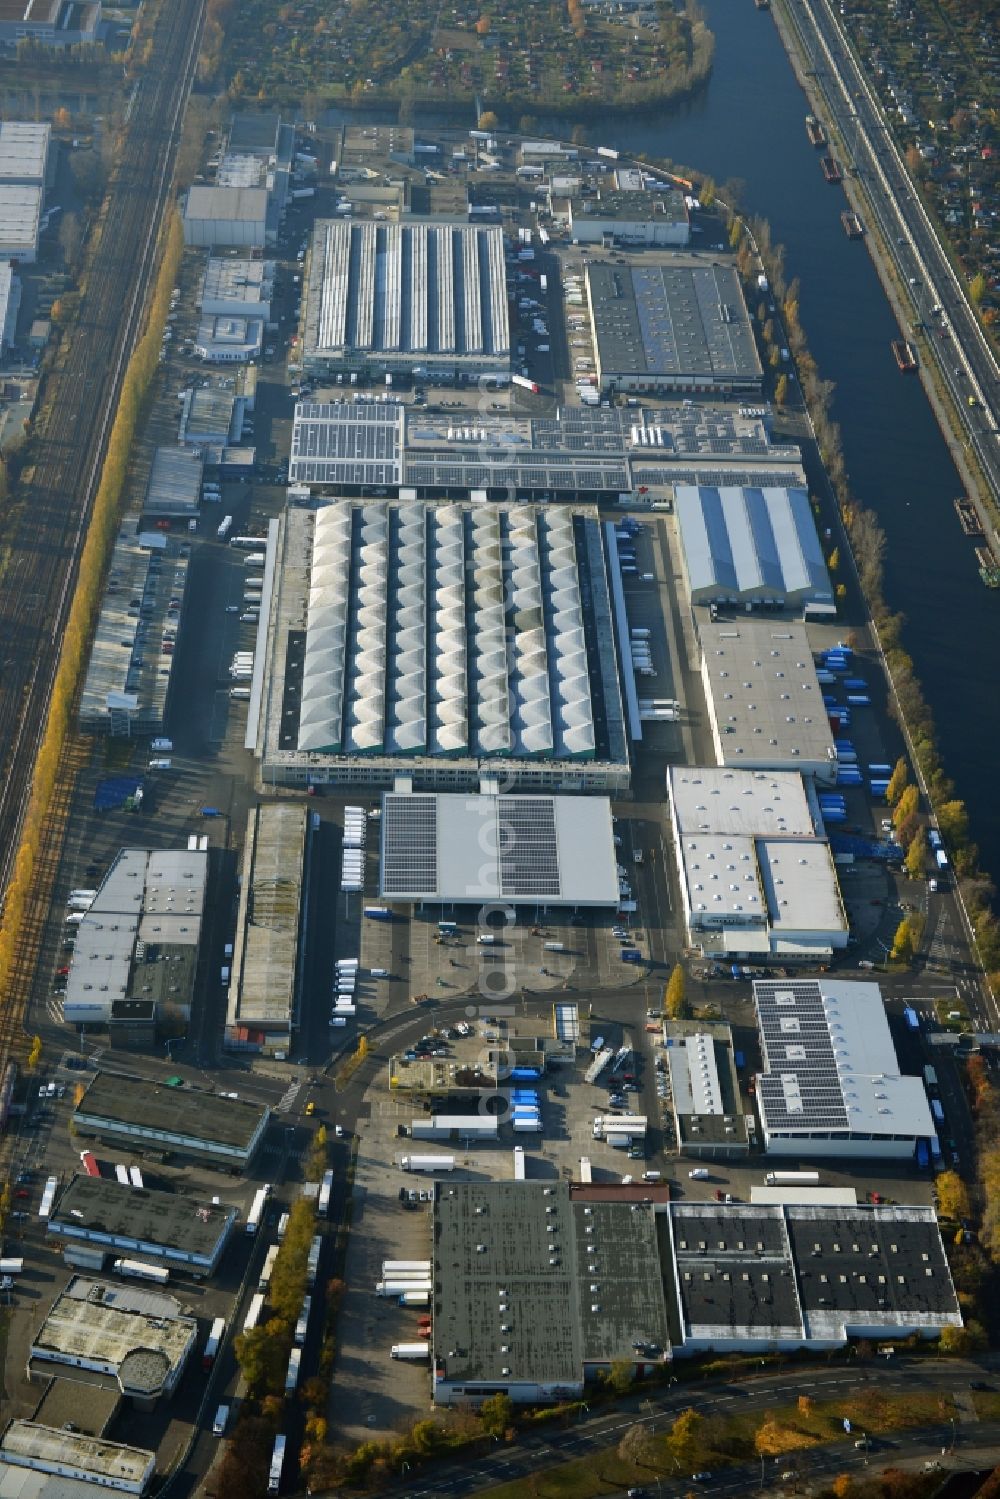 Aerial photograph Berlin - View of at the site of the Berlin wholesale market at the Beusselstrasse in Berlin